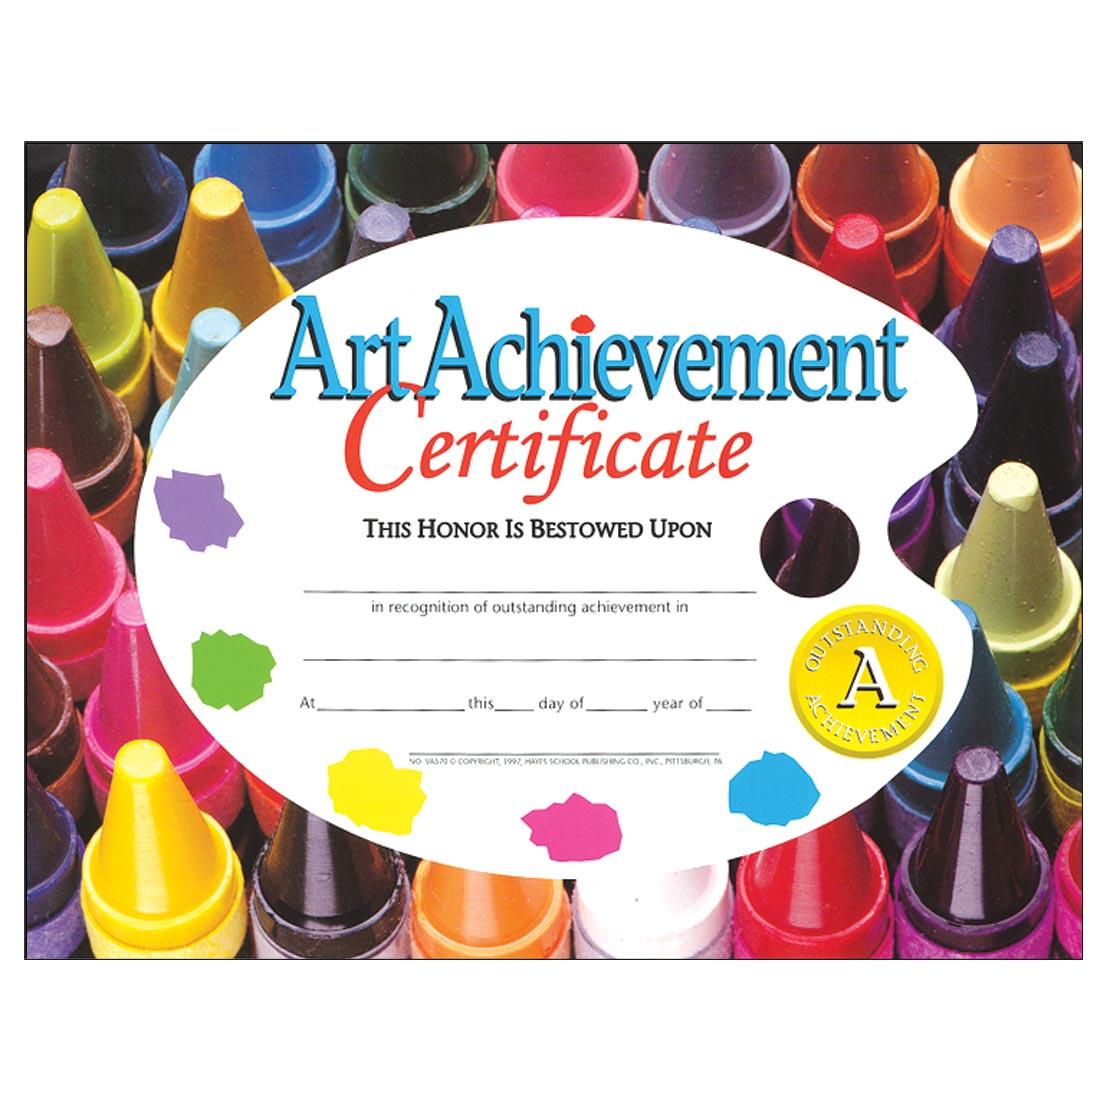 Art Achievement Certificate with colorful crayons as border